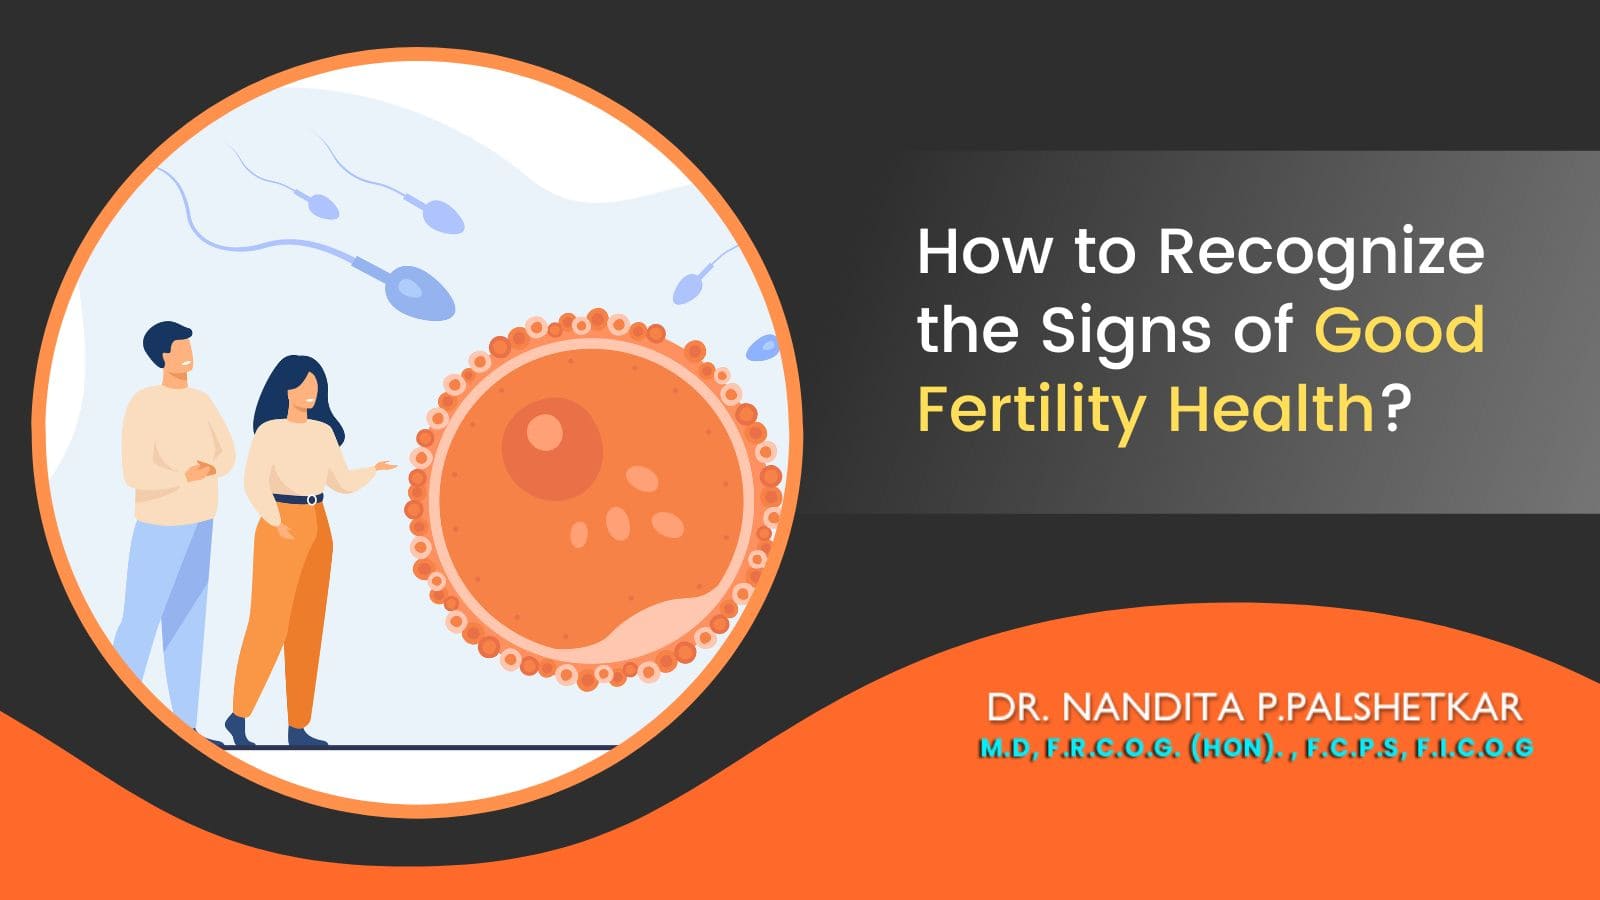 How to Recognize the Signs of Good Fertility Health?